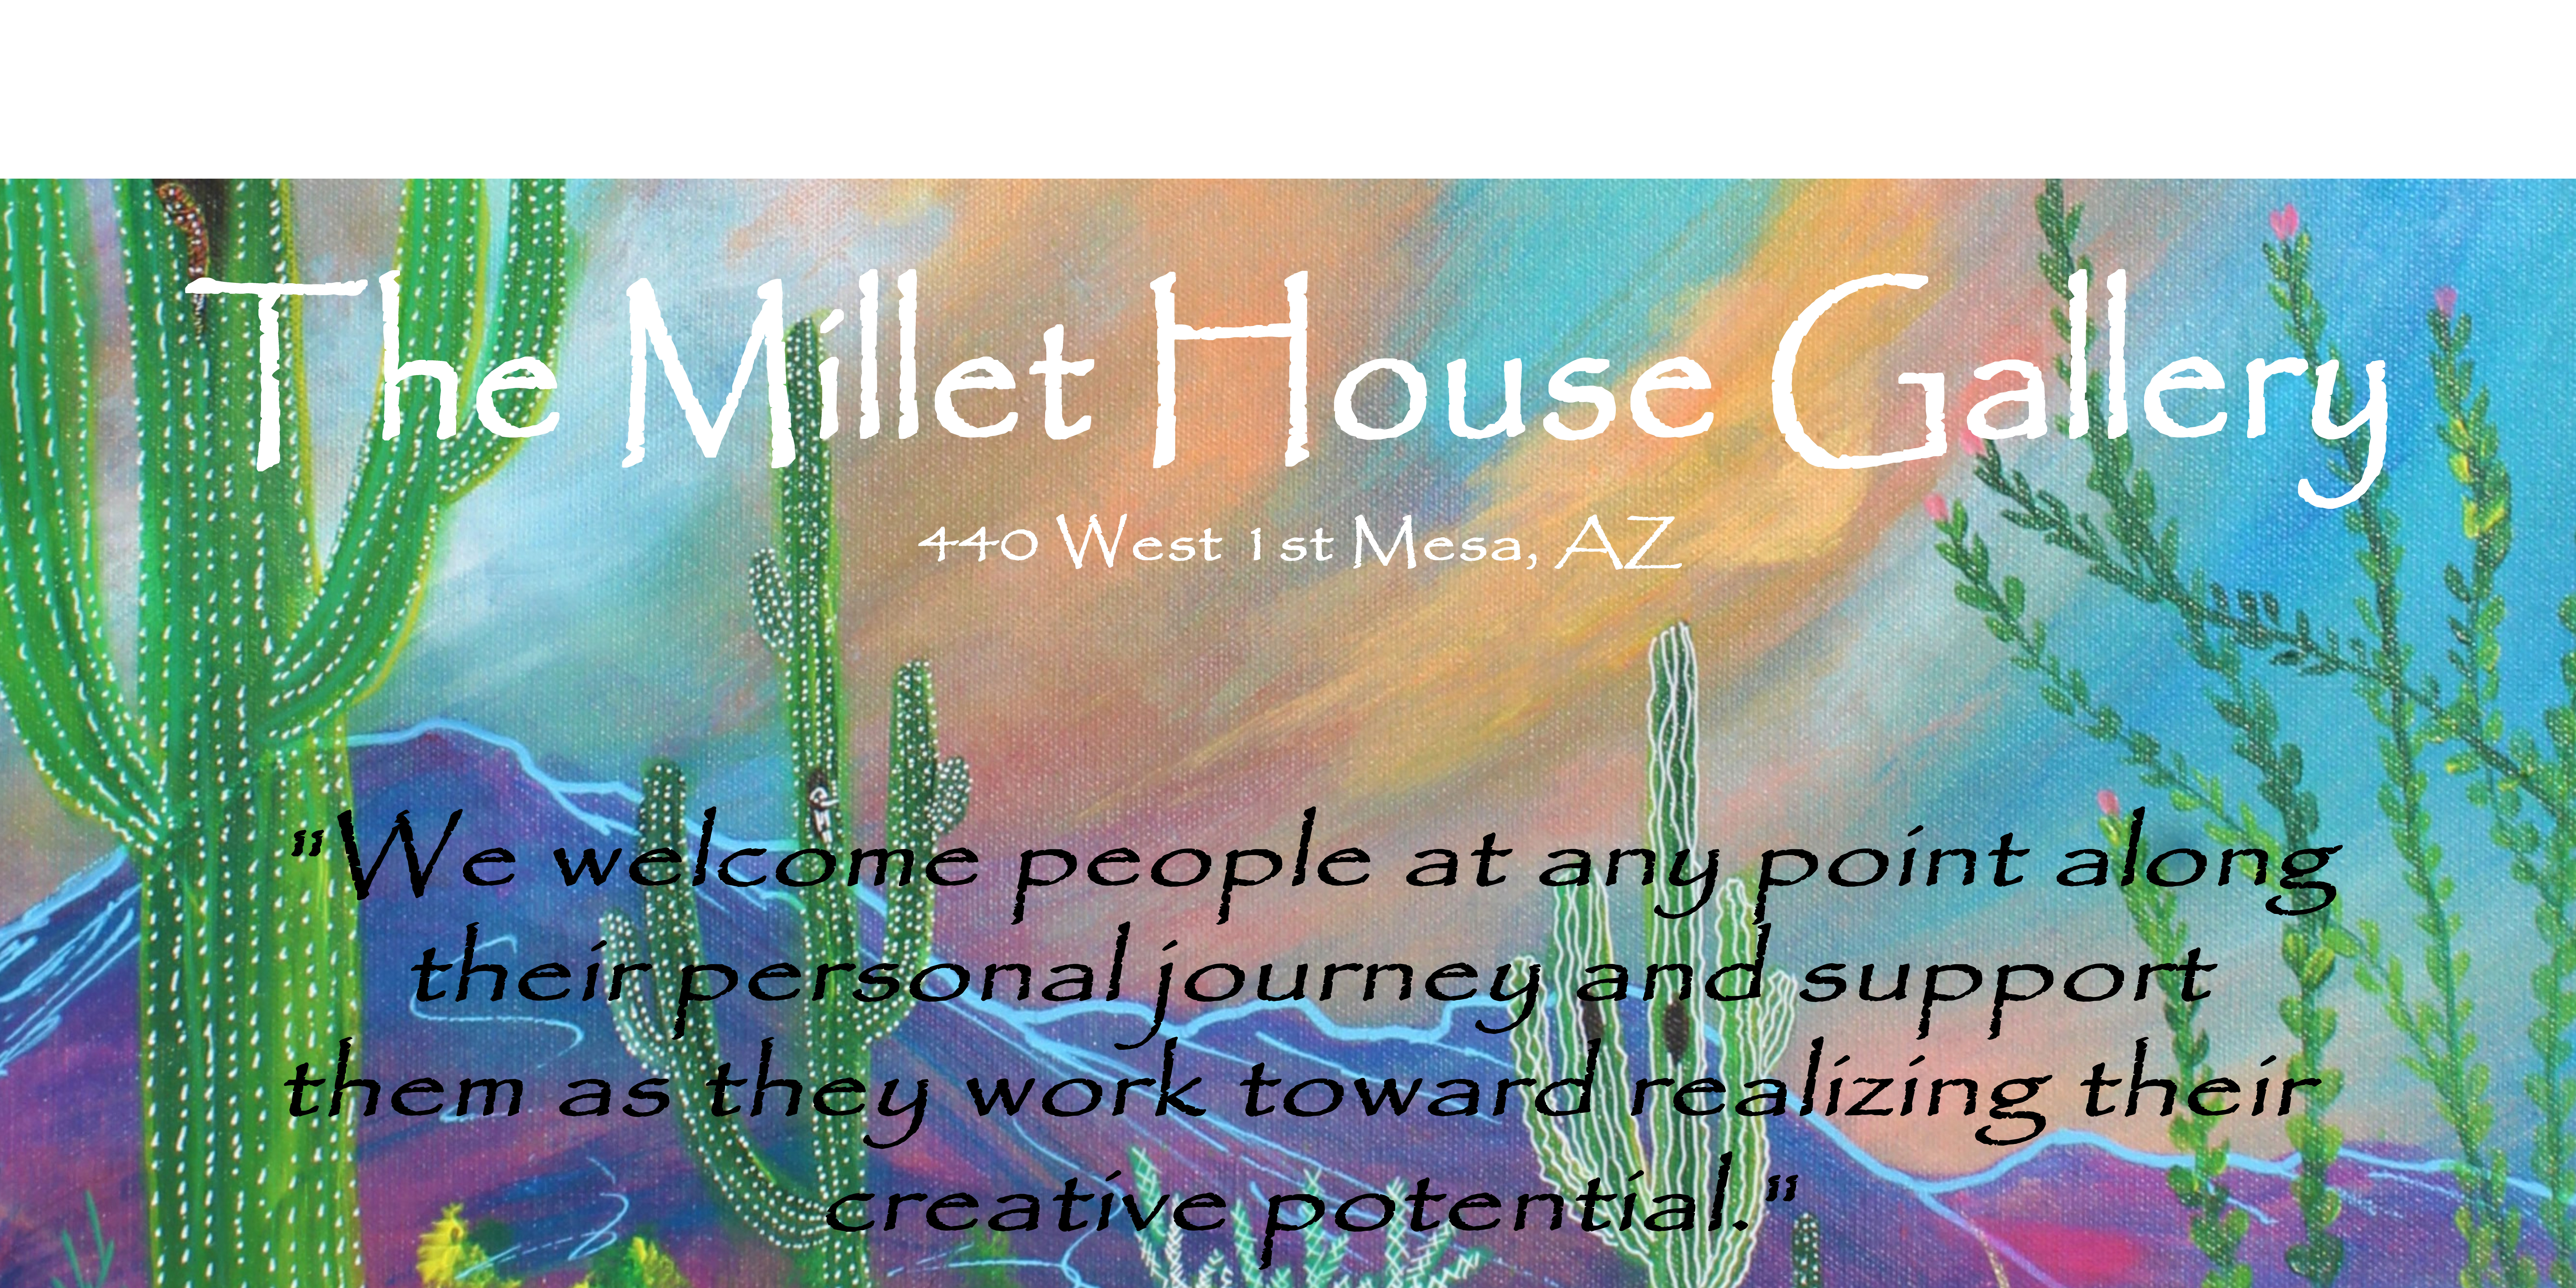 The Millet House